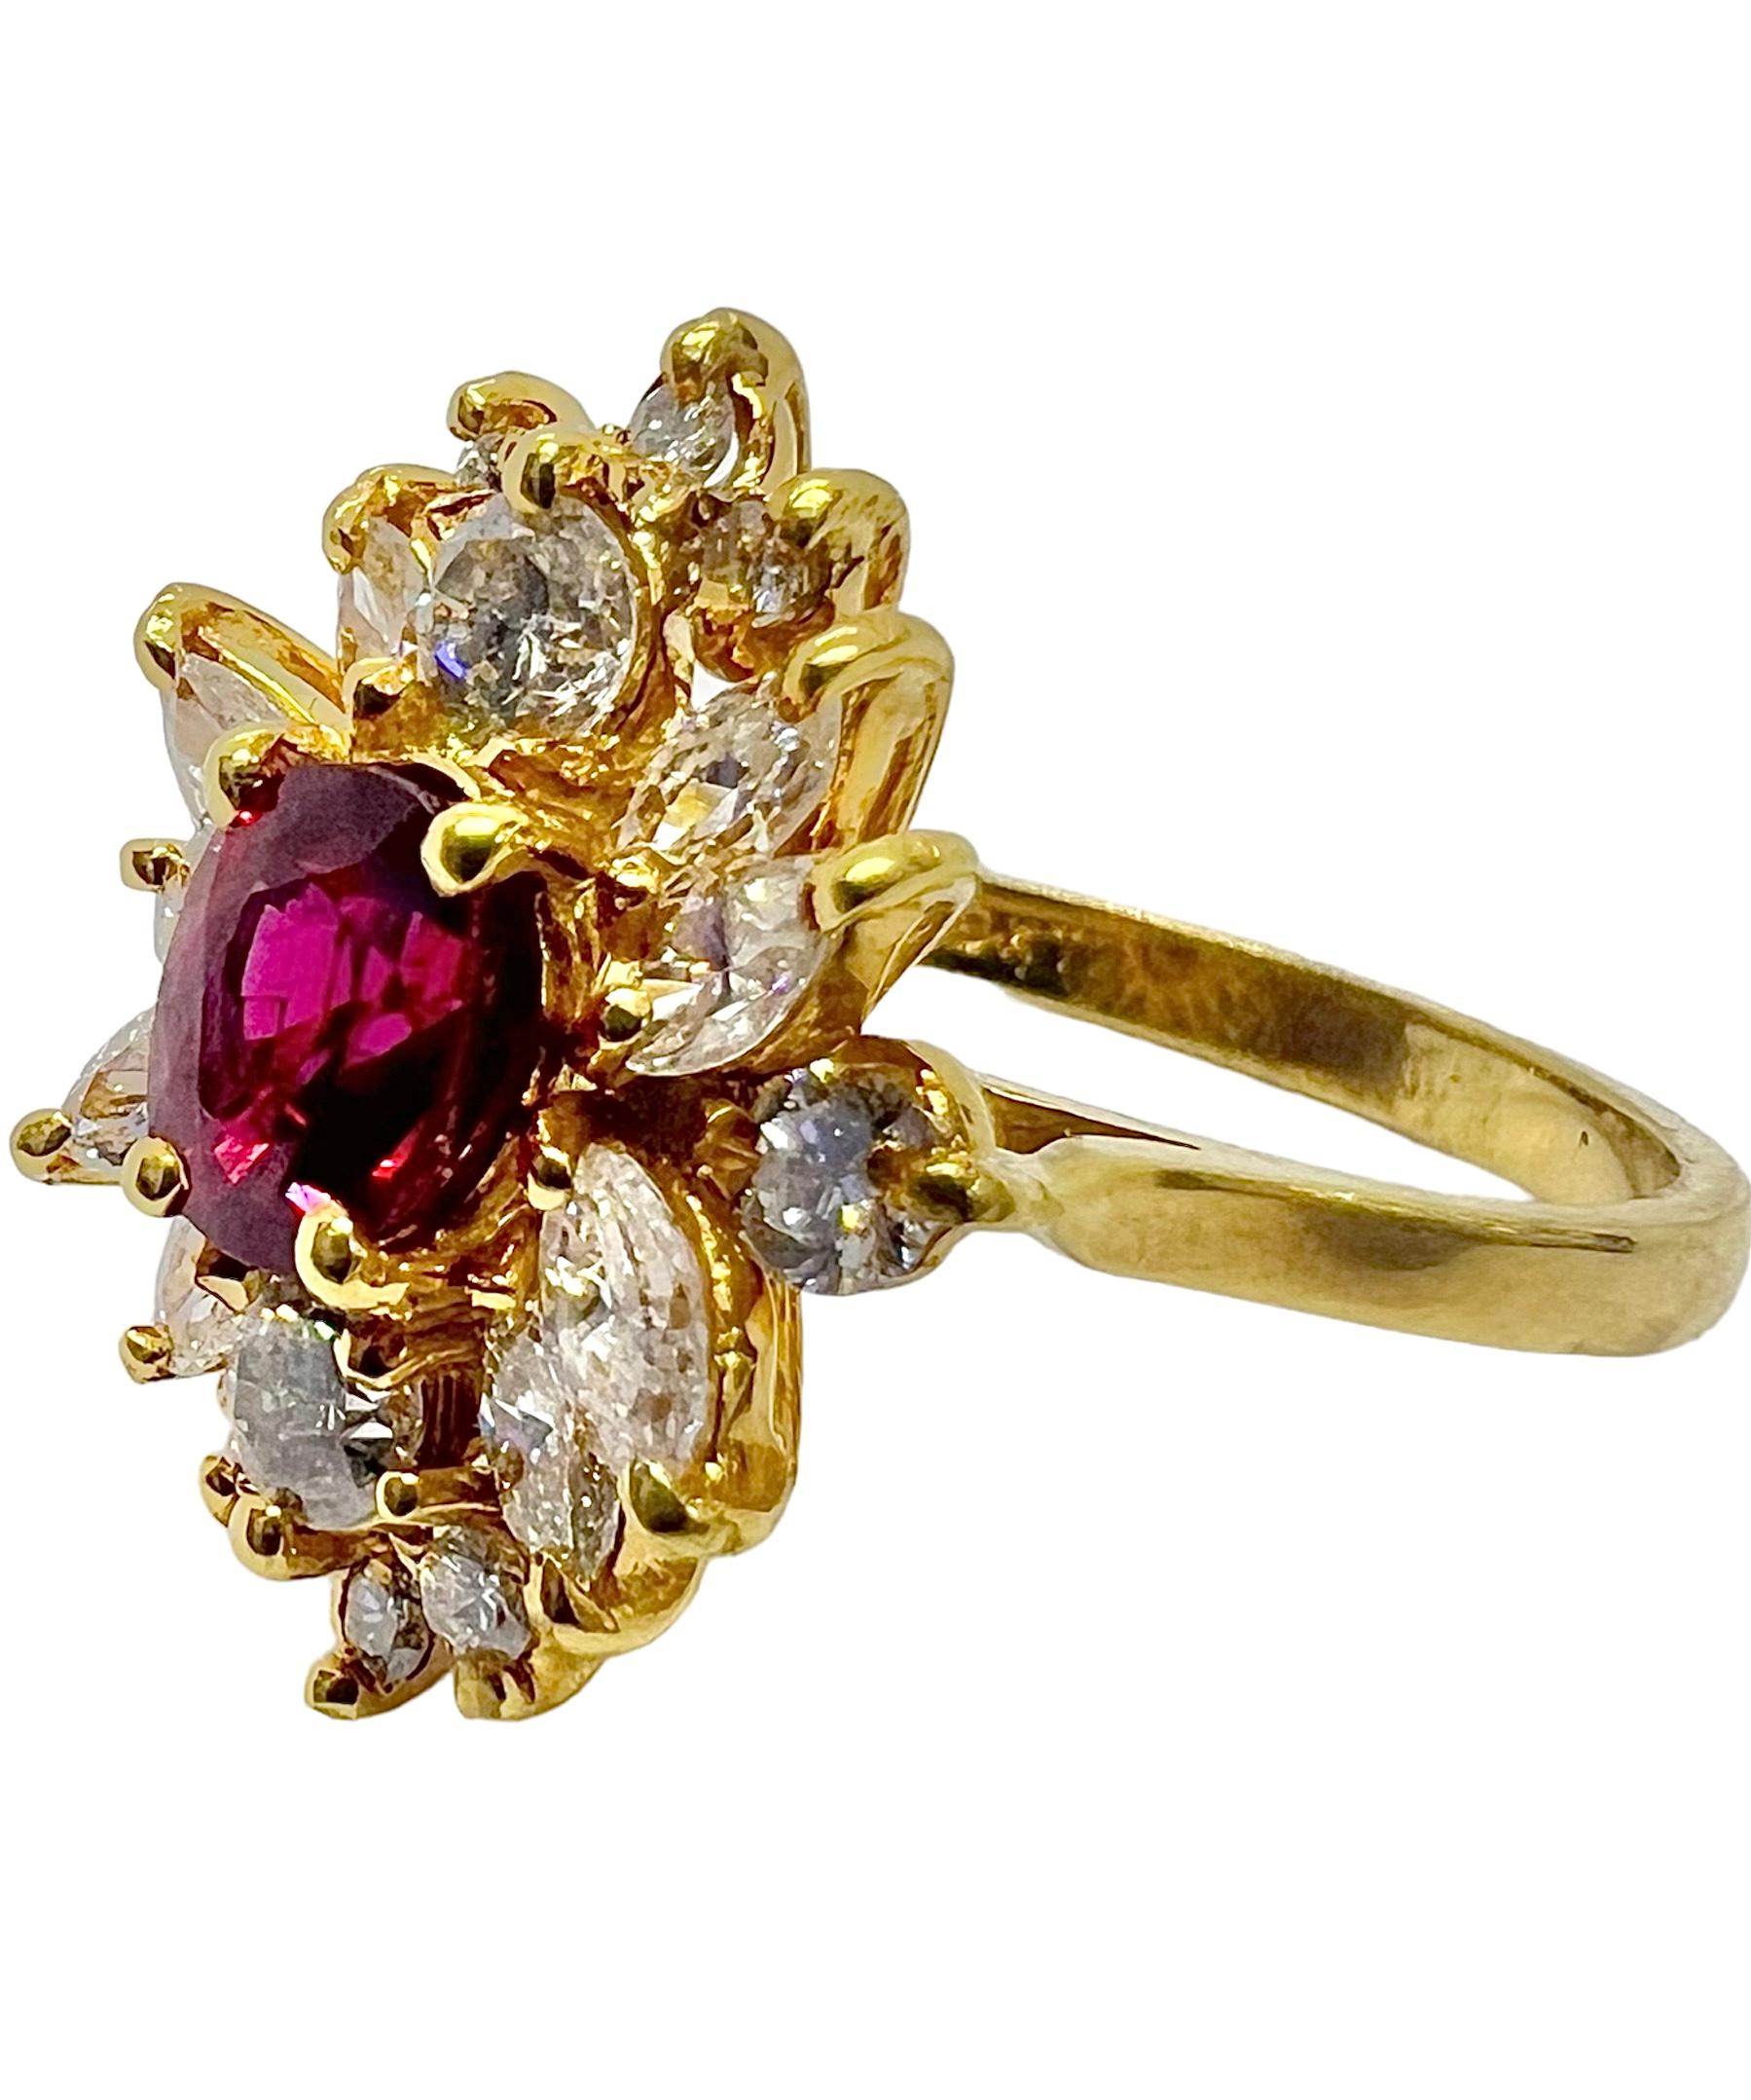 18K yellow gold ring with diamonds and ruby center stone.

Sophia D by Joseph Dardashti LTD has been known worldwide for 35 years and are inspired by classic Art Deco design that merges with modern manufacturing techniques.  